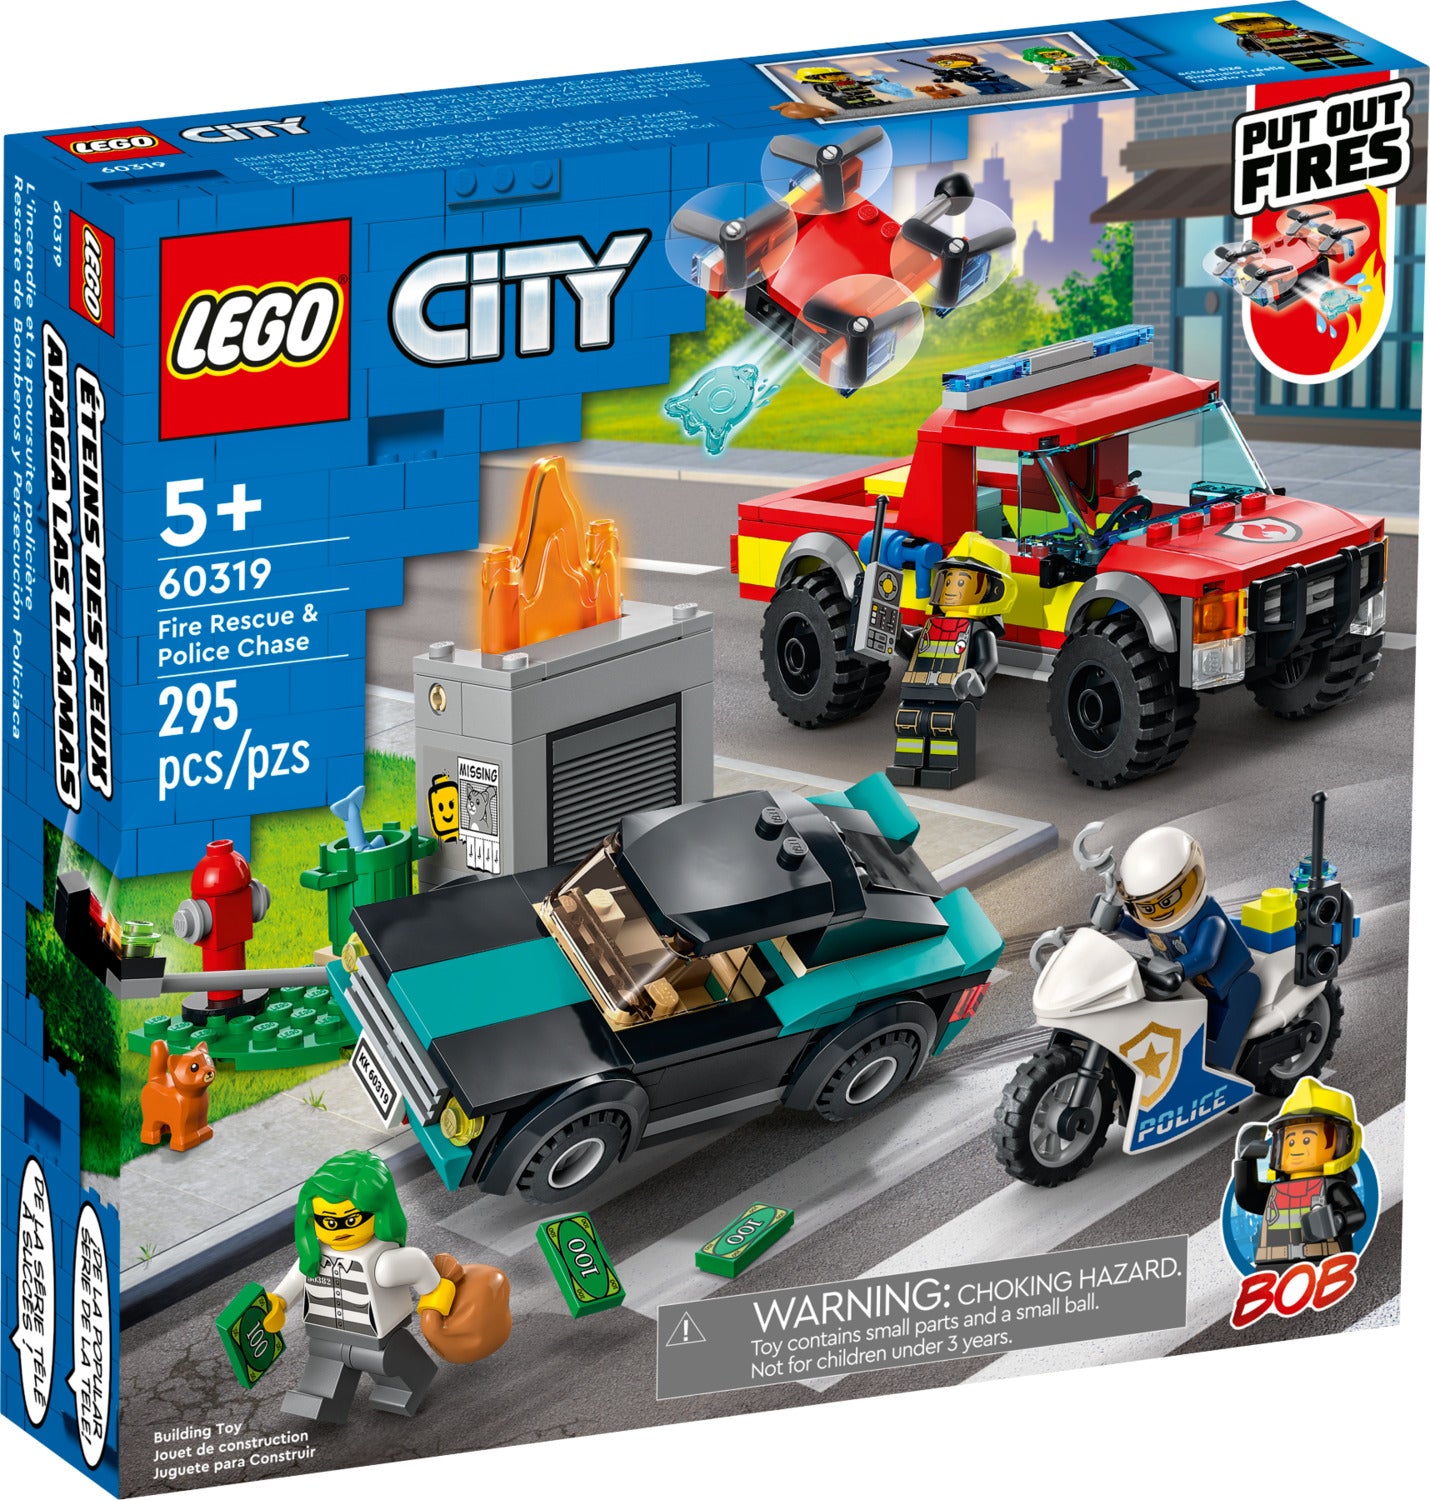 LEGO City Beach Lifeguard Station 60328 Building Kit for Ages 5+, with 4  Minifigures and Crab and Turtle Figures (211 Pieces)